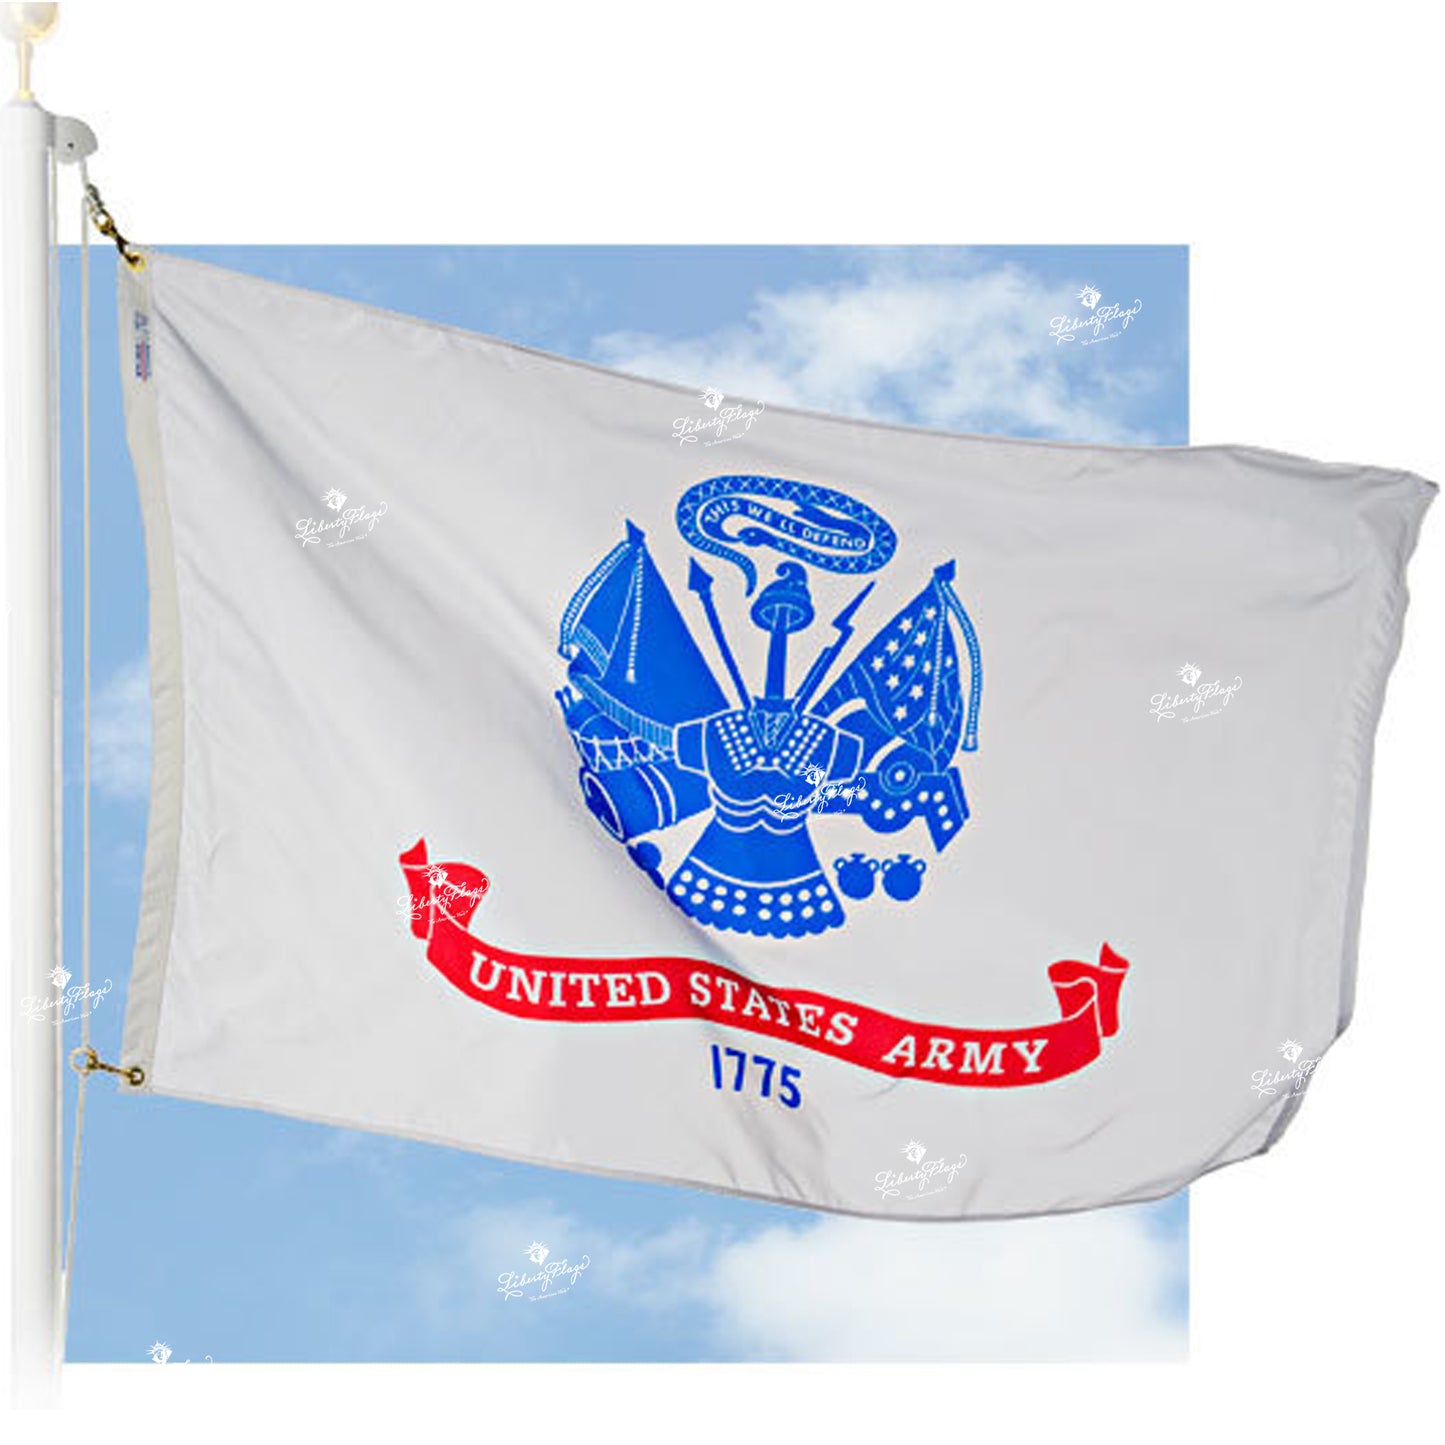 Military Nylon Outdoor Flags -  Set of 5 flags only